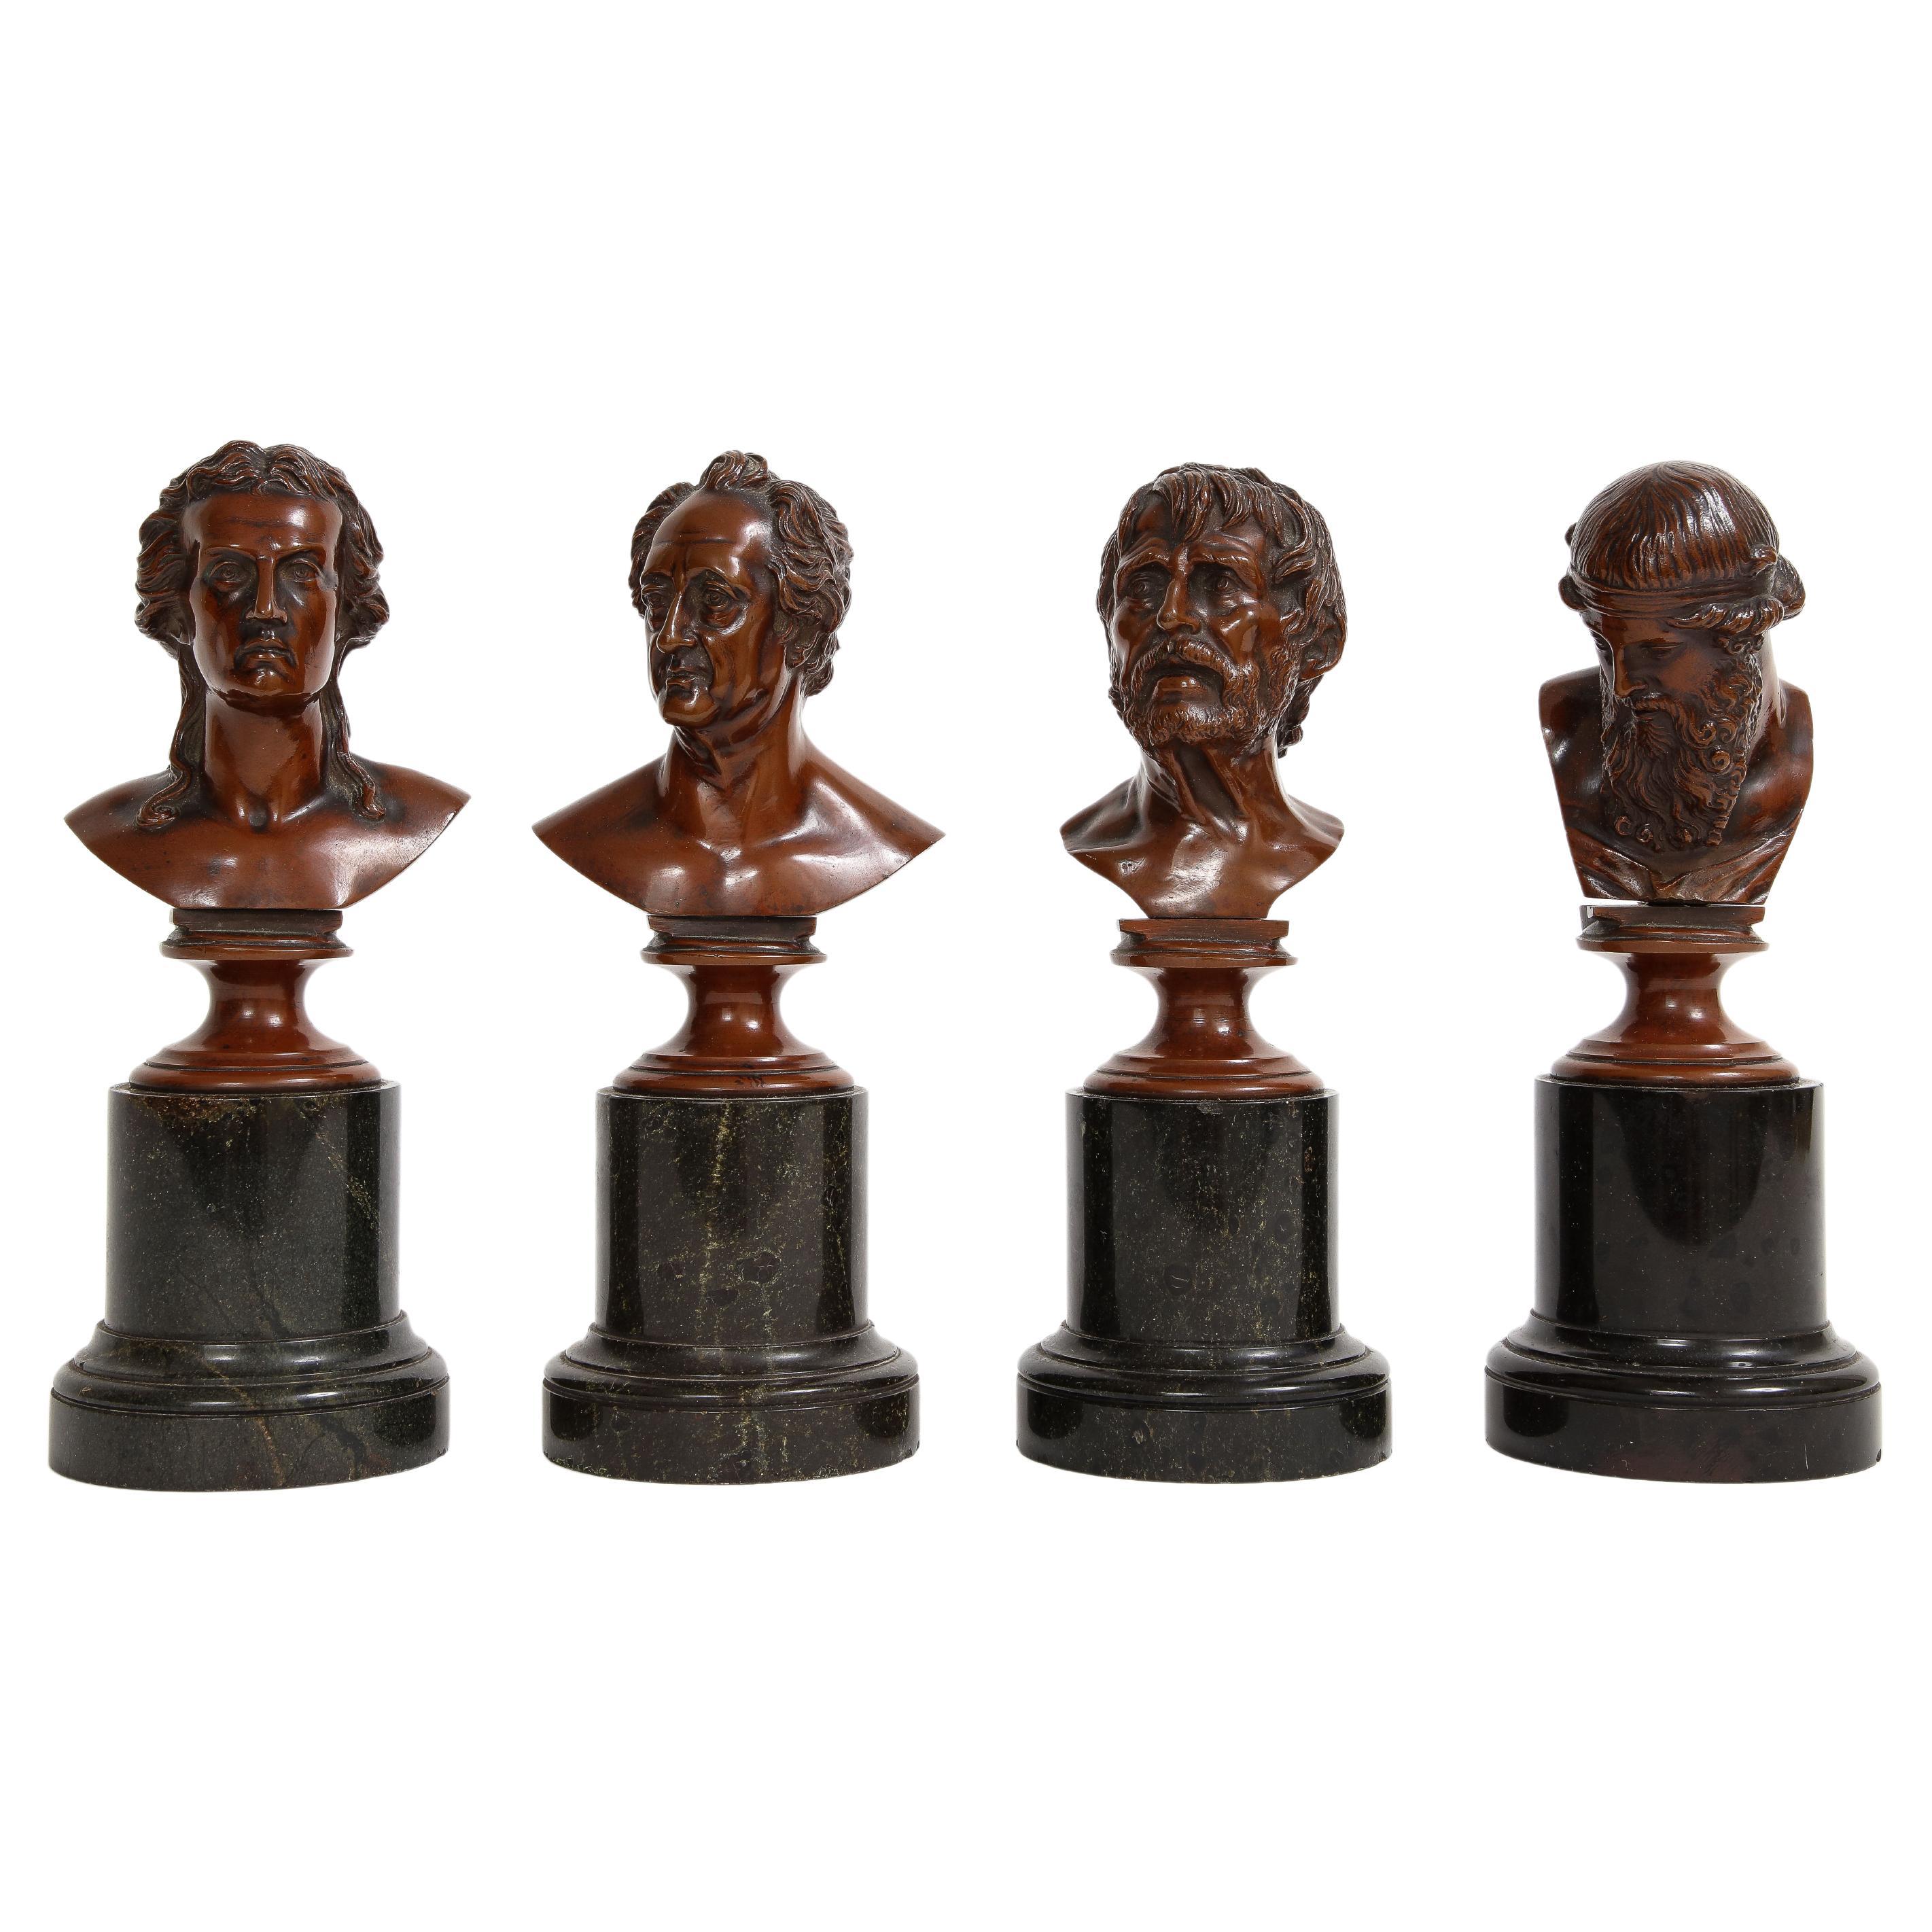 Set of 4 19th C. French Patinated Bronze Marble Mounted Busts of Philosophers